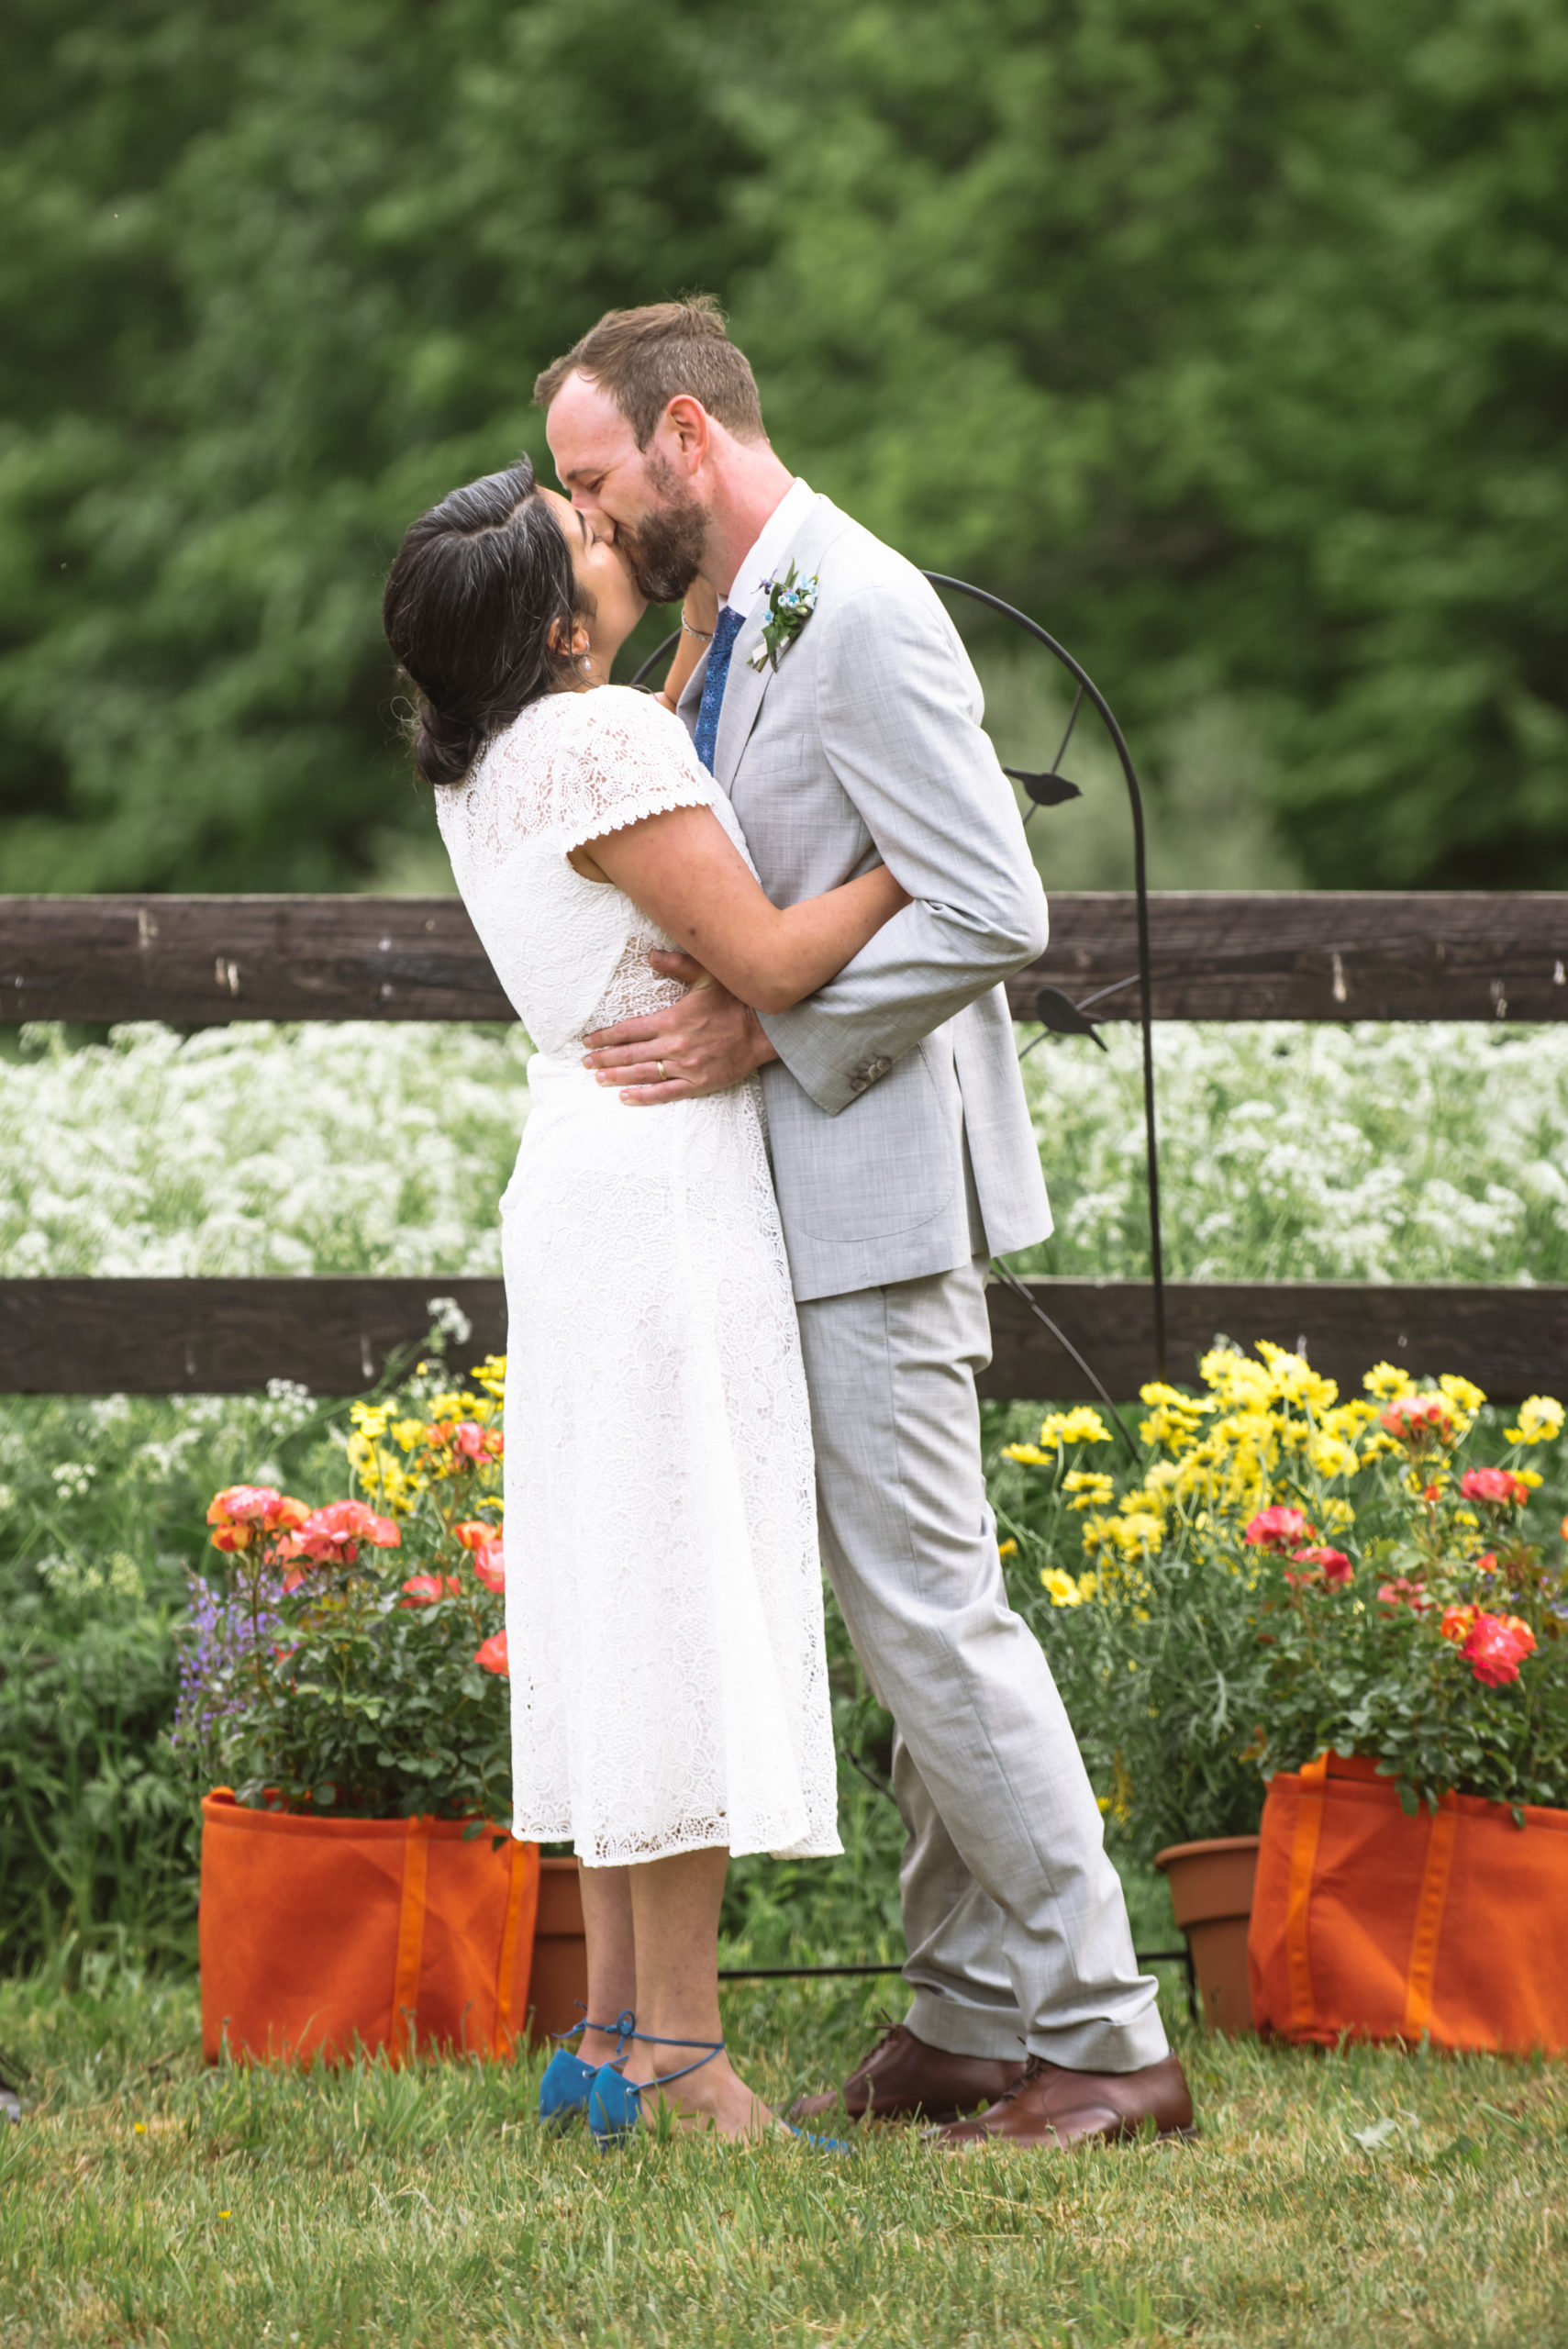 Ceremony featuring the couple embracing with their arms around one another and kissing after being pronounced wife and husband. They are standing in front of a dark wooden fence with lots of white wildflowers in the field. There are trees and mountains in the background.